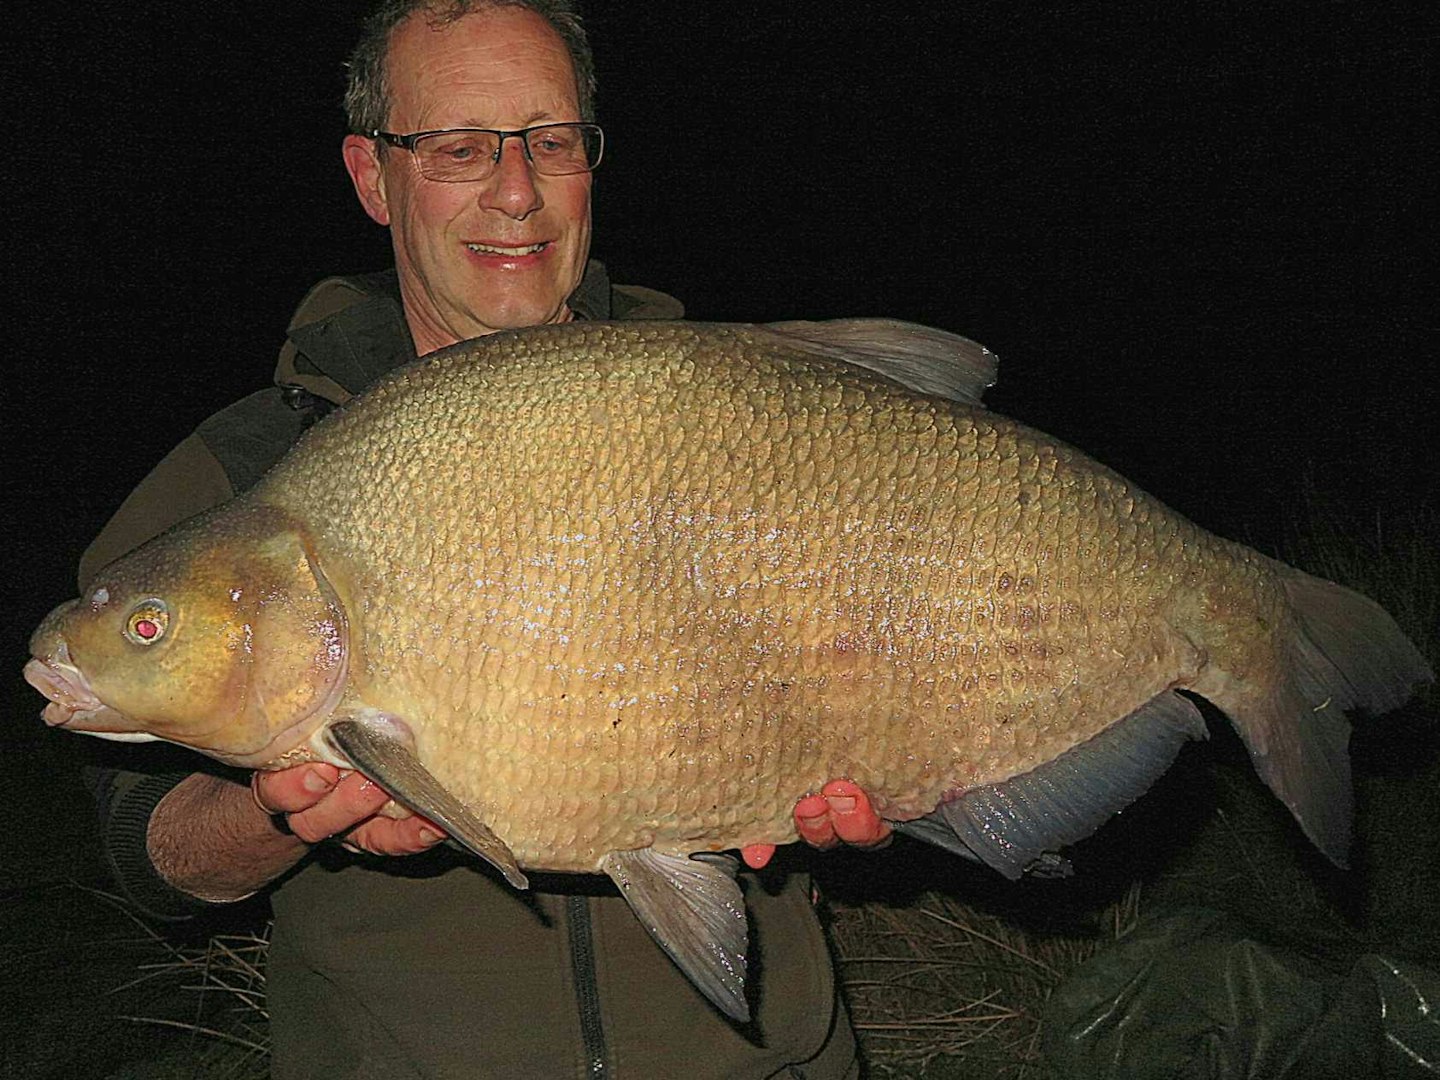 The 17lb 7oz bream in all its glory.